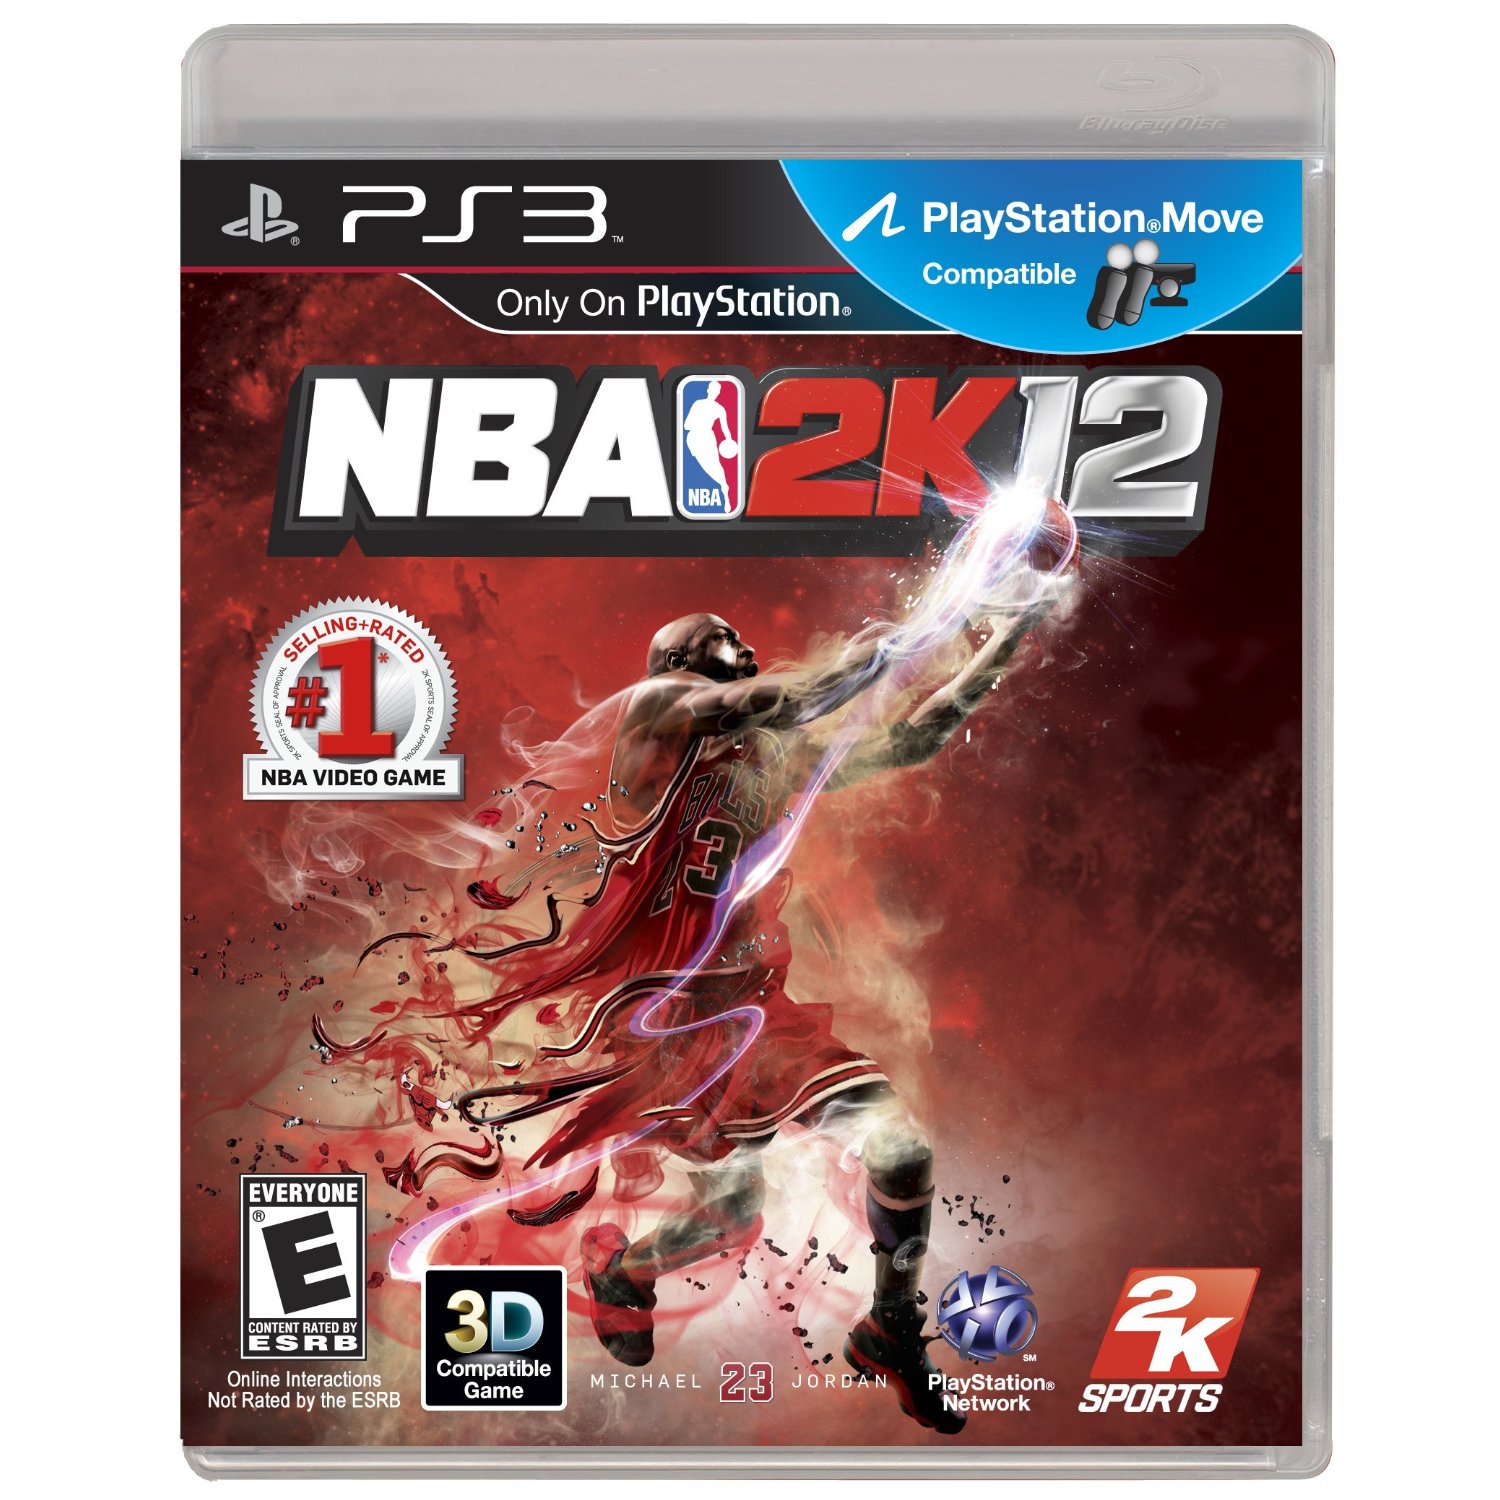 http://thetechjournal.com/wp-content/uploads/images/1109/1316953461-nba-2k12--game-for-preorder-now-1.jpg